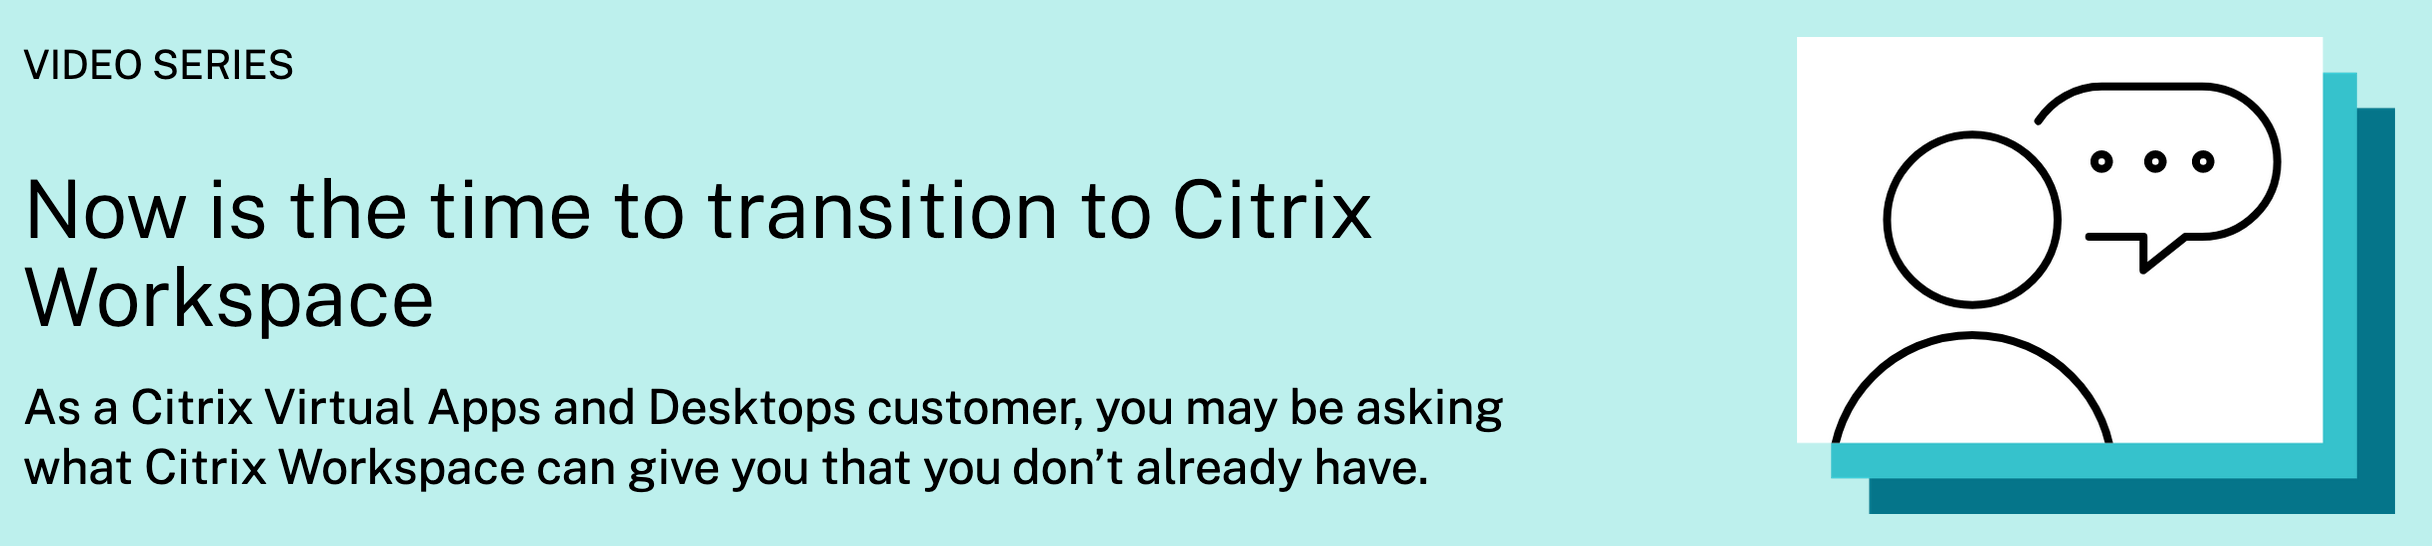 Now is the time to transition to Citrix Workpsace